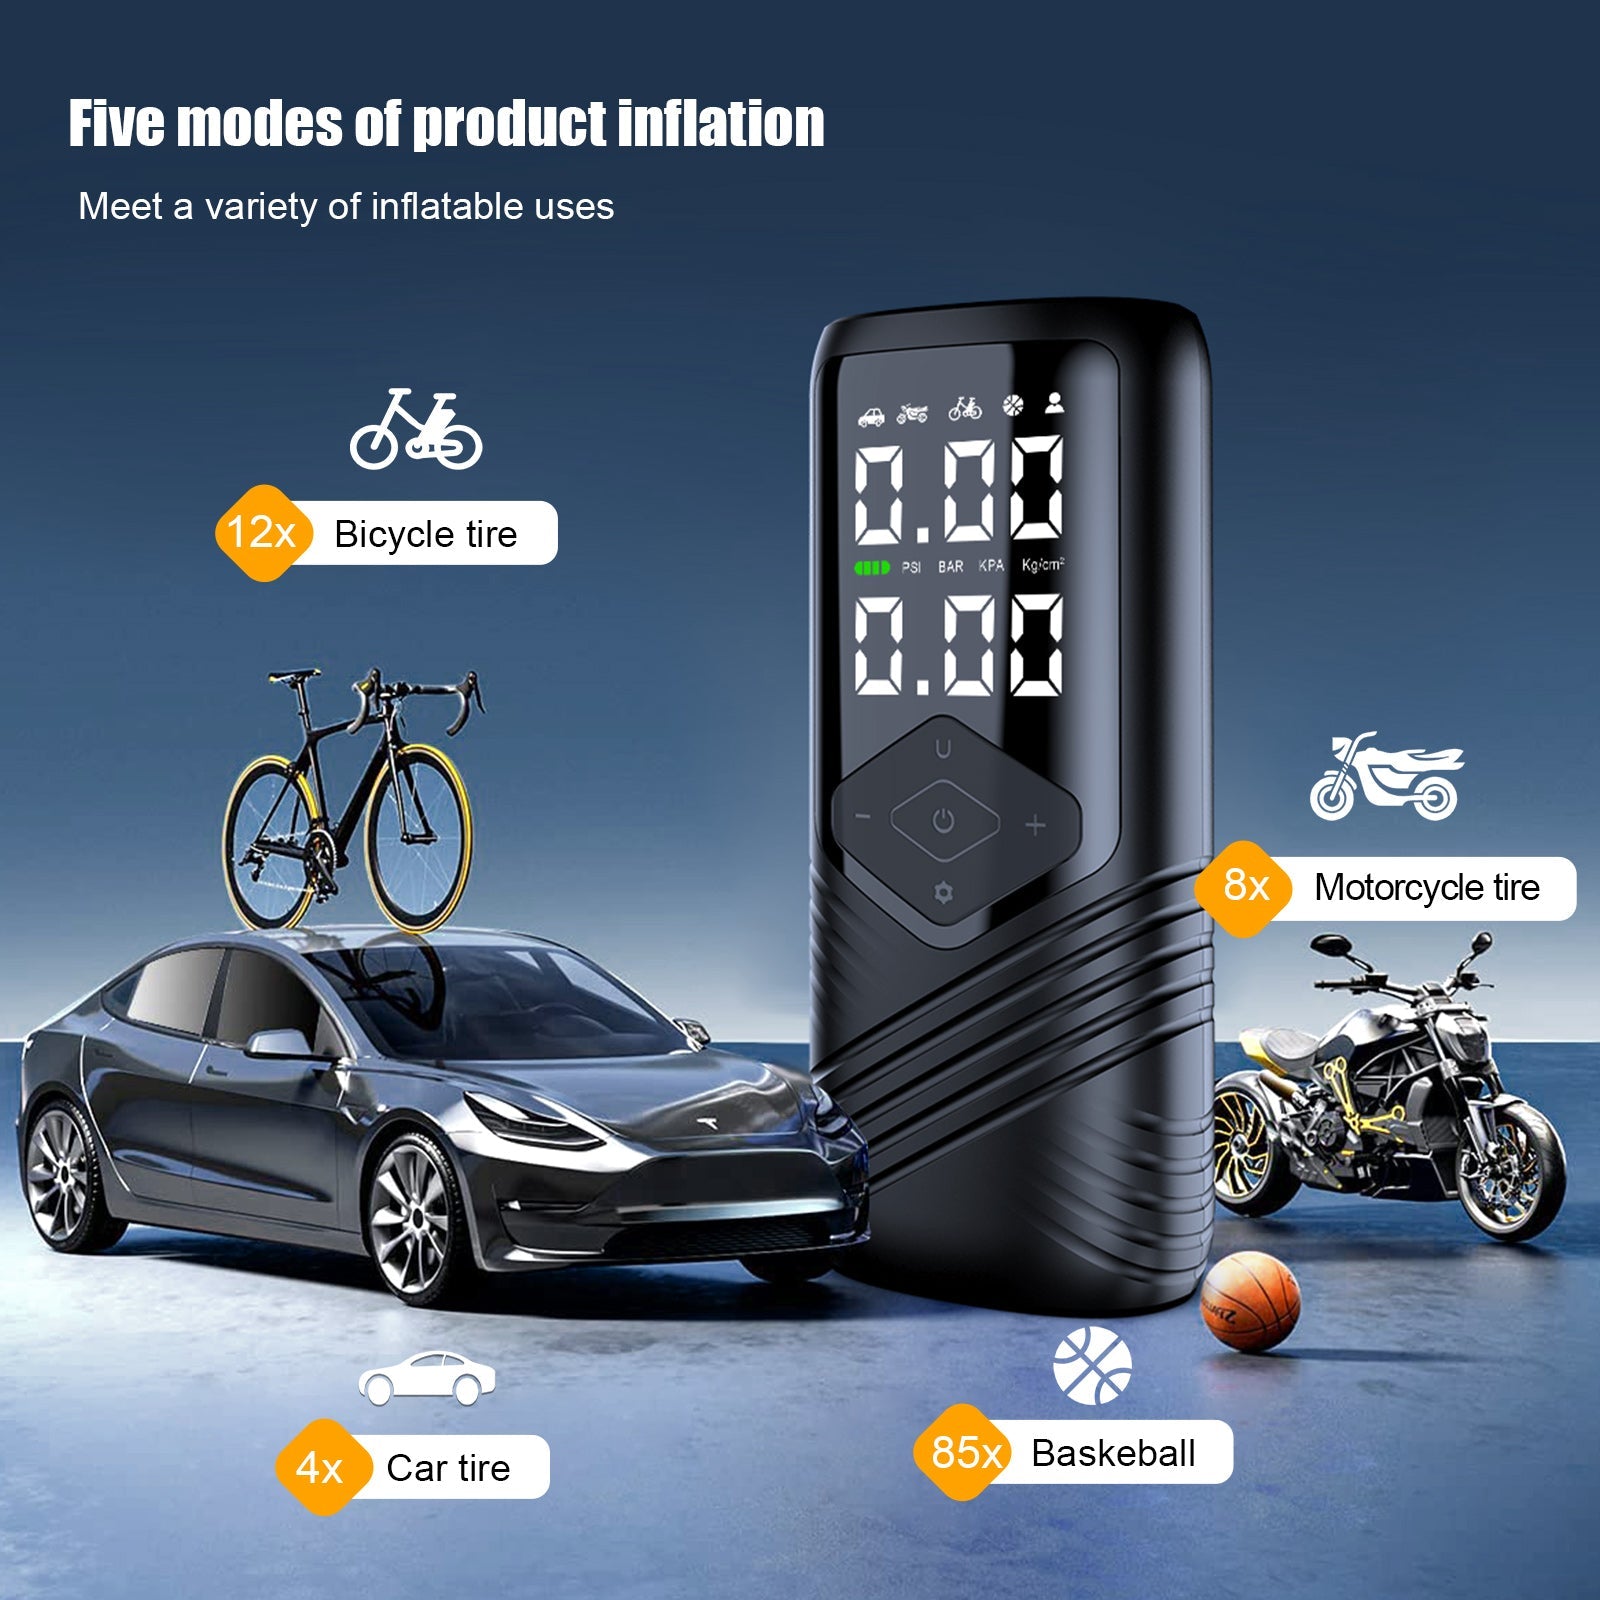 Intelligent Tire Pump for Tesla - Tesery Official Store